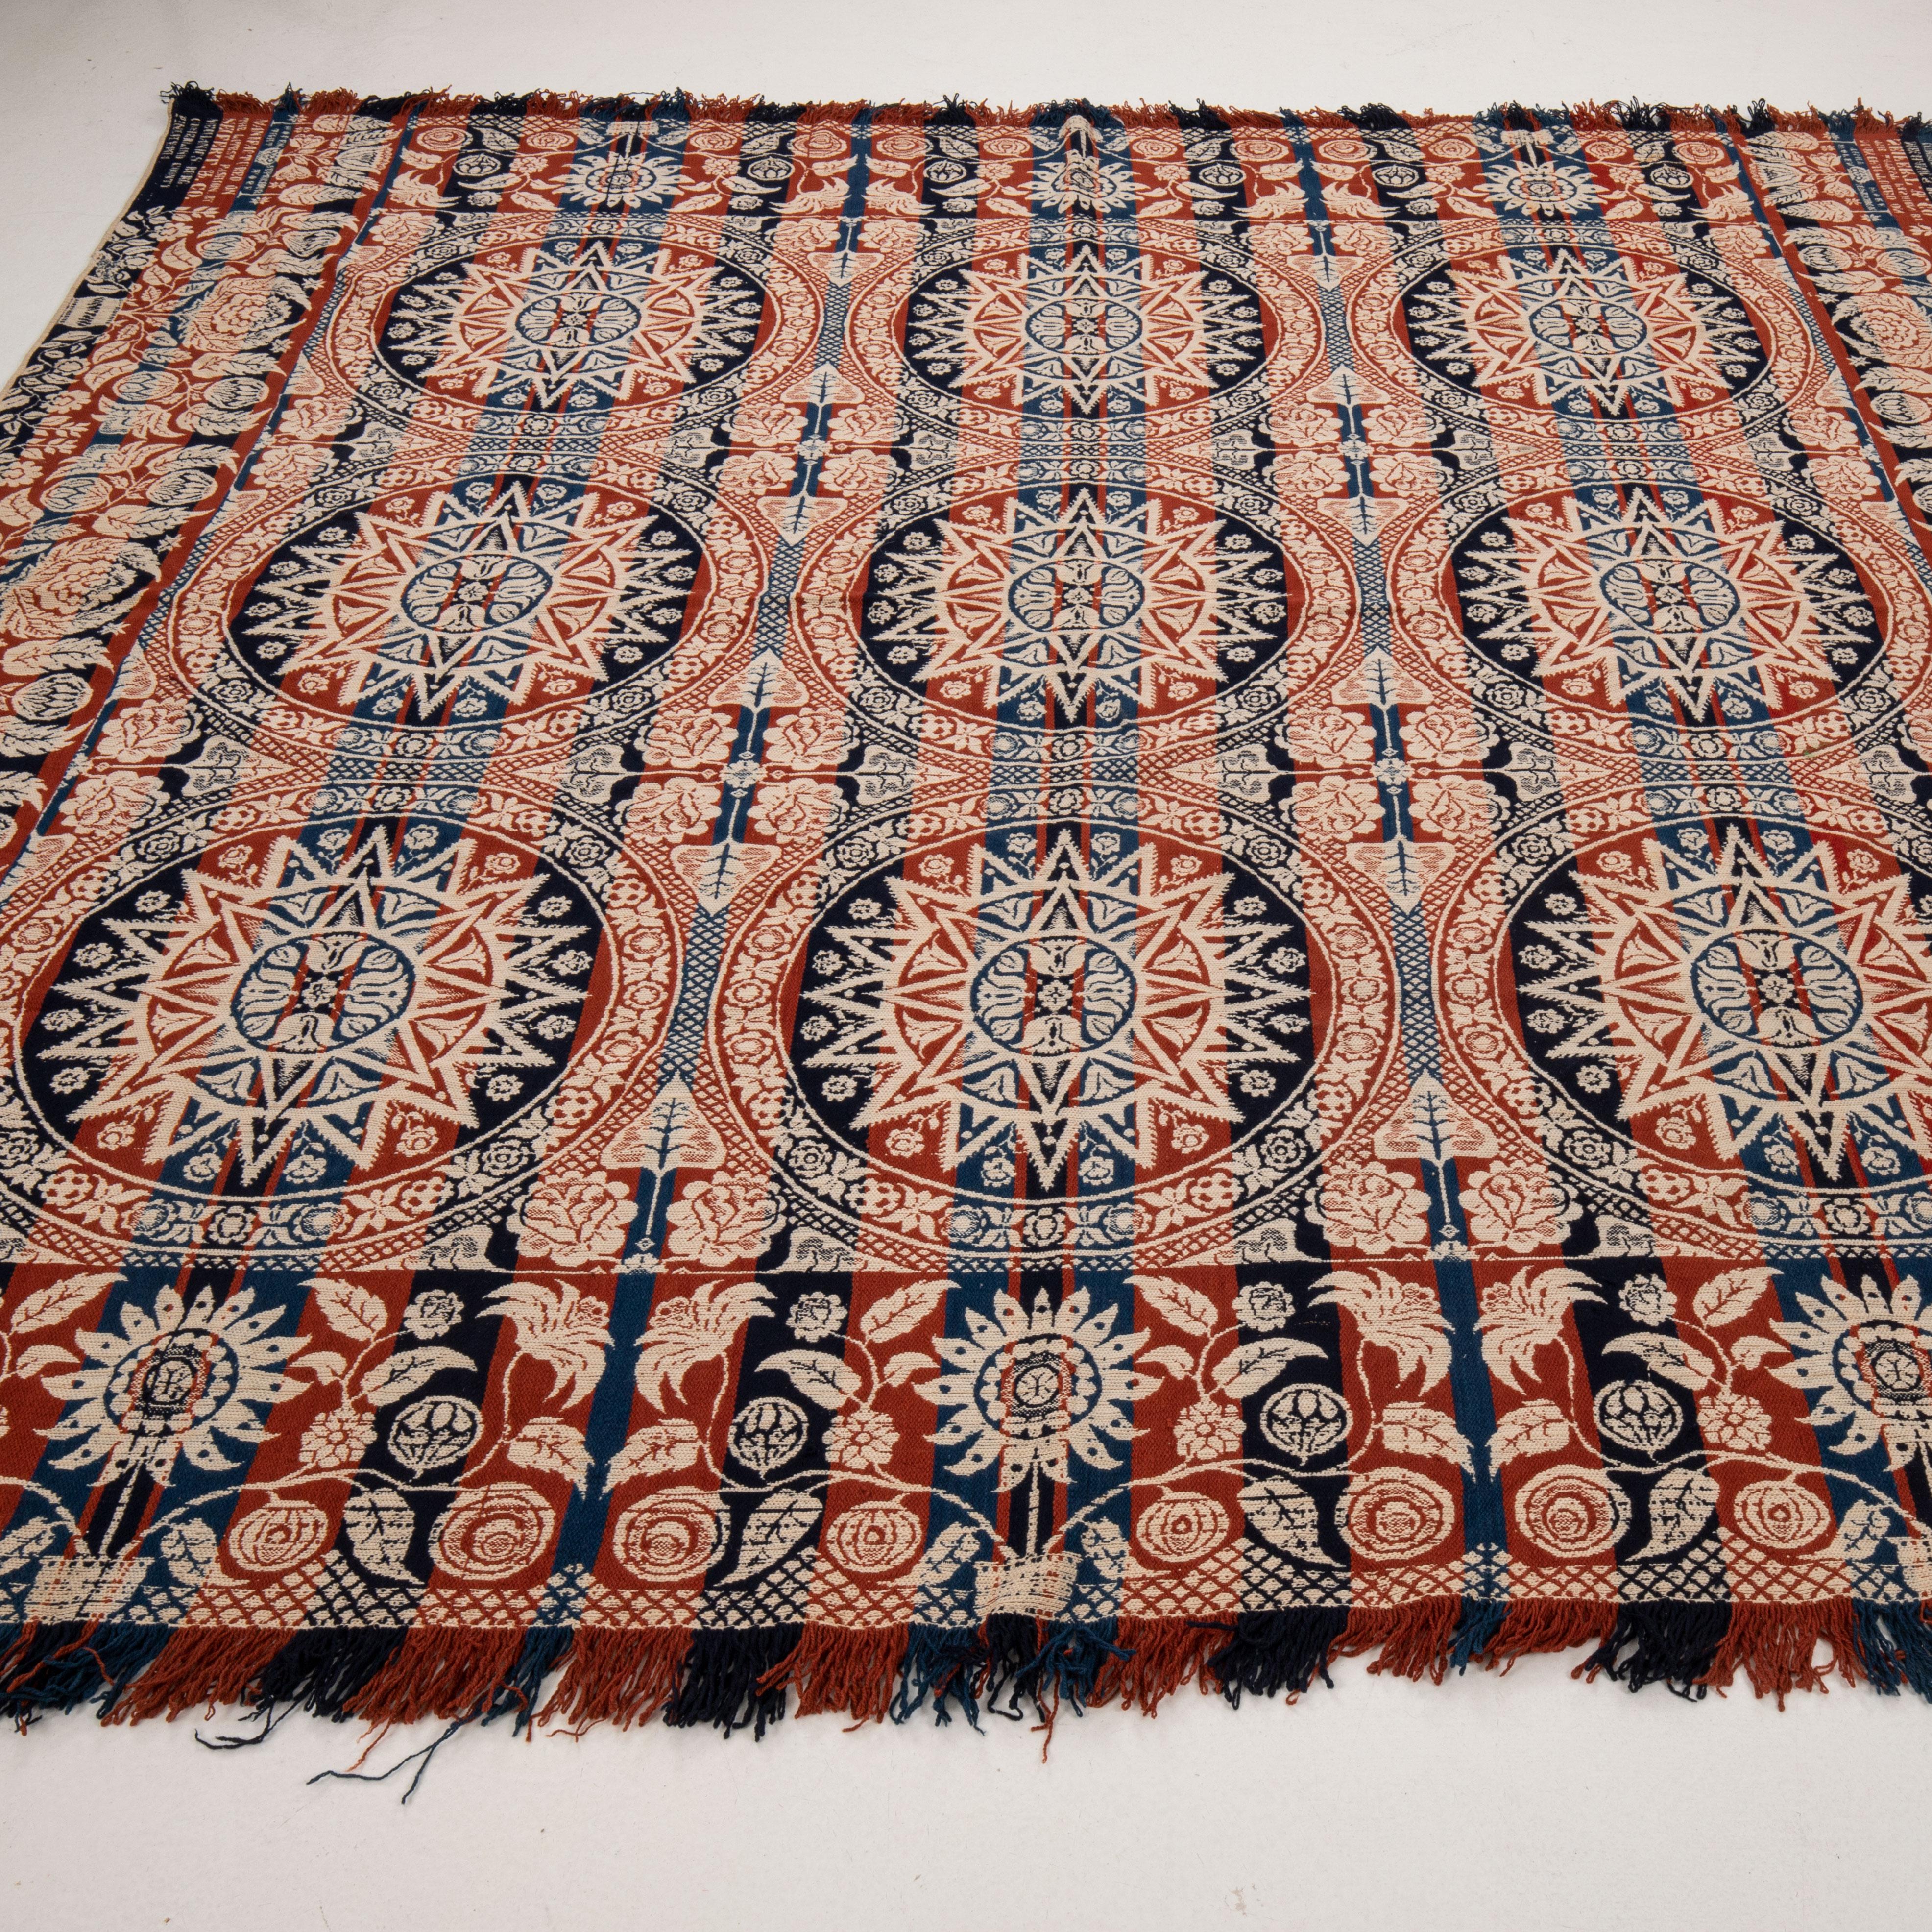 Jacquard Woven American Coverlet 19th C. In Good Condition For Sale In Istanbul, TR